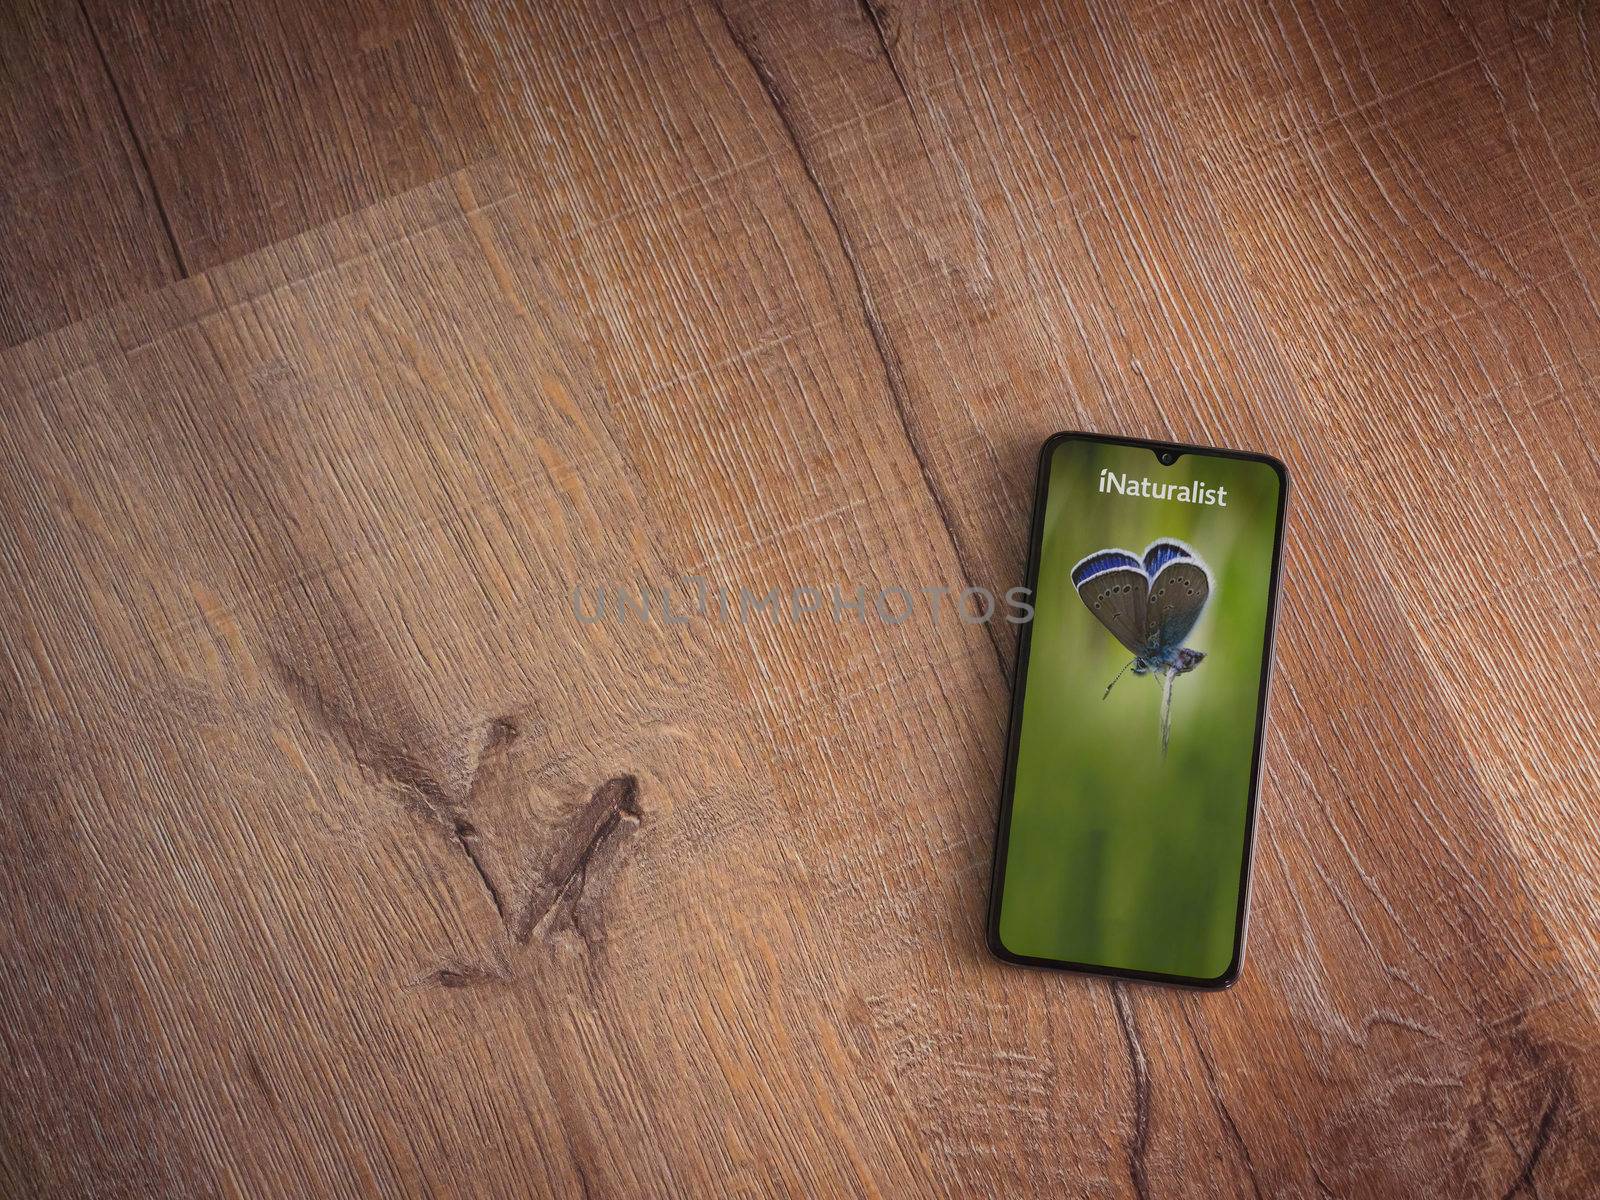 Lod, Israel - July 8, 2020: iNaturalist app launch screen with logo on the display of a black mobile smartphone on wooden background. Top view flat lay with copy space.